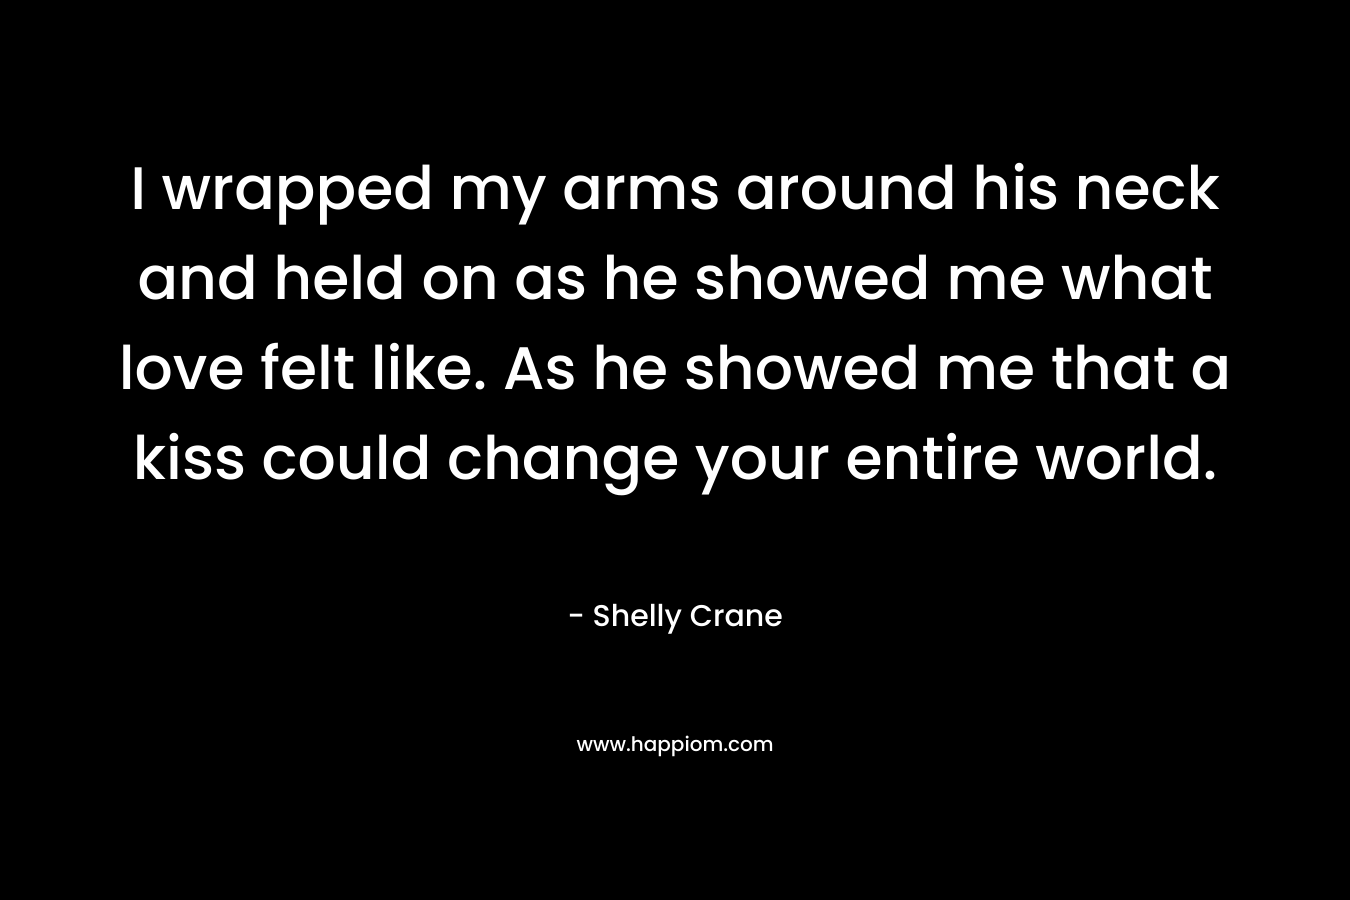 I wrapped my arms around his neck and held on as he showed me what love felt like. As he showed me that a kiss could change your entire world. – Shelly Crane